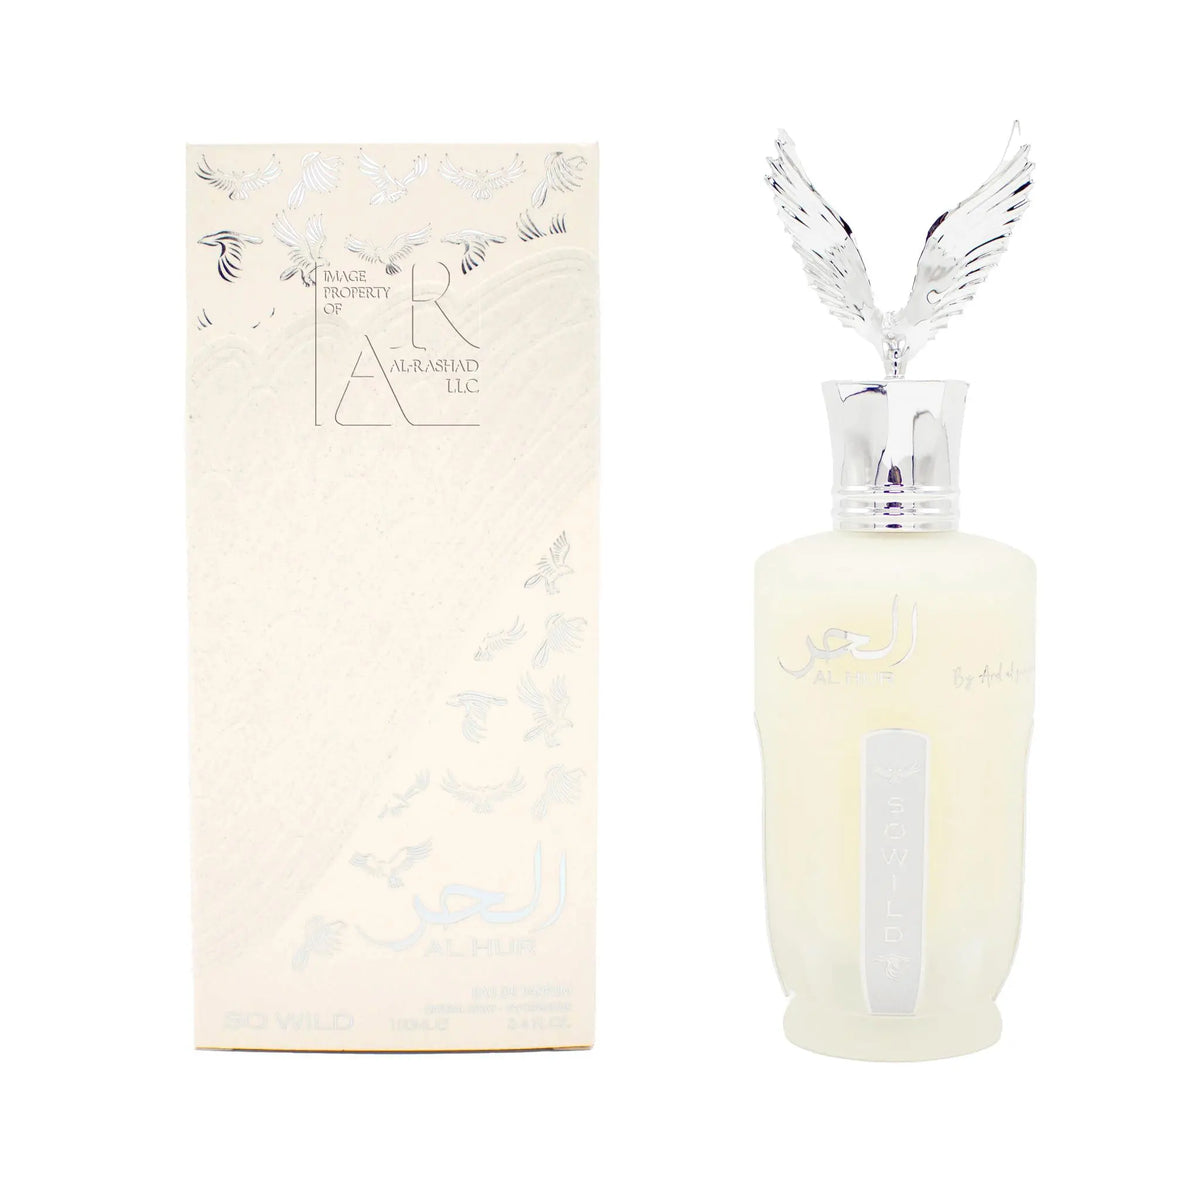 The image features two products placed against a white background: to the left is a vertical, rectangular perfume box and to the right is a corresponding perfume bottle. The box is off-white with an embossed pattern, adorned with silver embossed doves and has text indicating it is "AL HUR SO WILD 100ml by Ard Al Zaafaran," along with a watermark stating "IMAGE PROPERTY OF AL-RASHAD LLC." Both items have Arabic script and the bottle features a label with the words "SO WILD."  